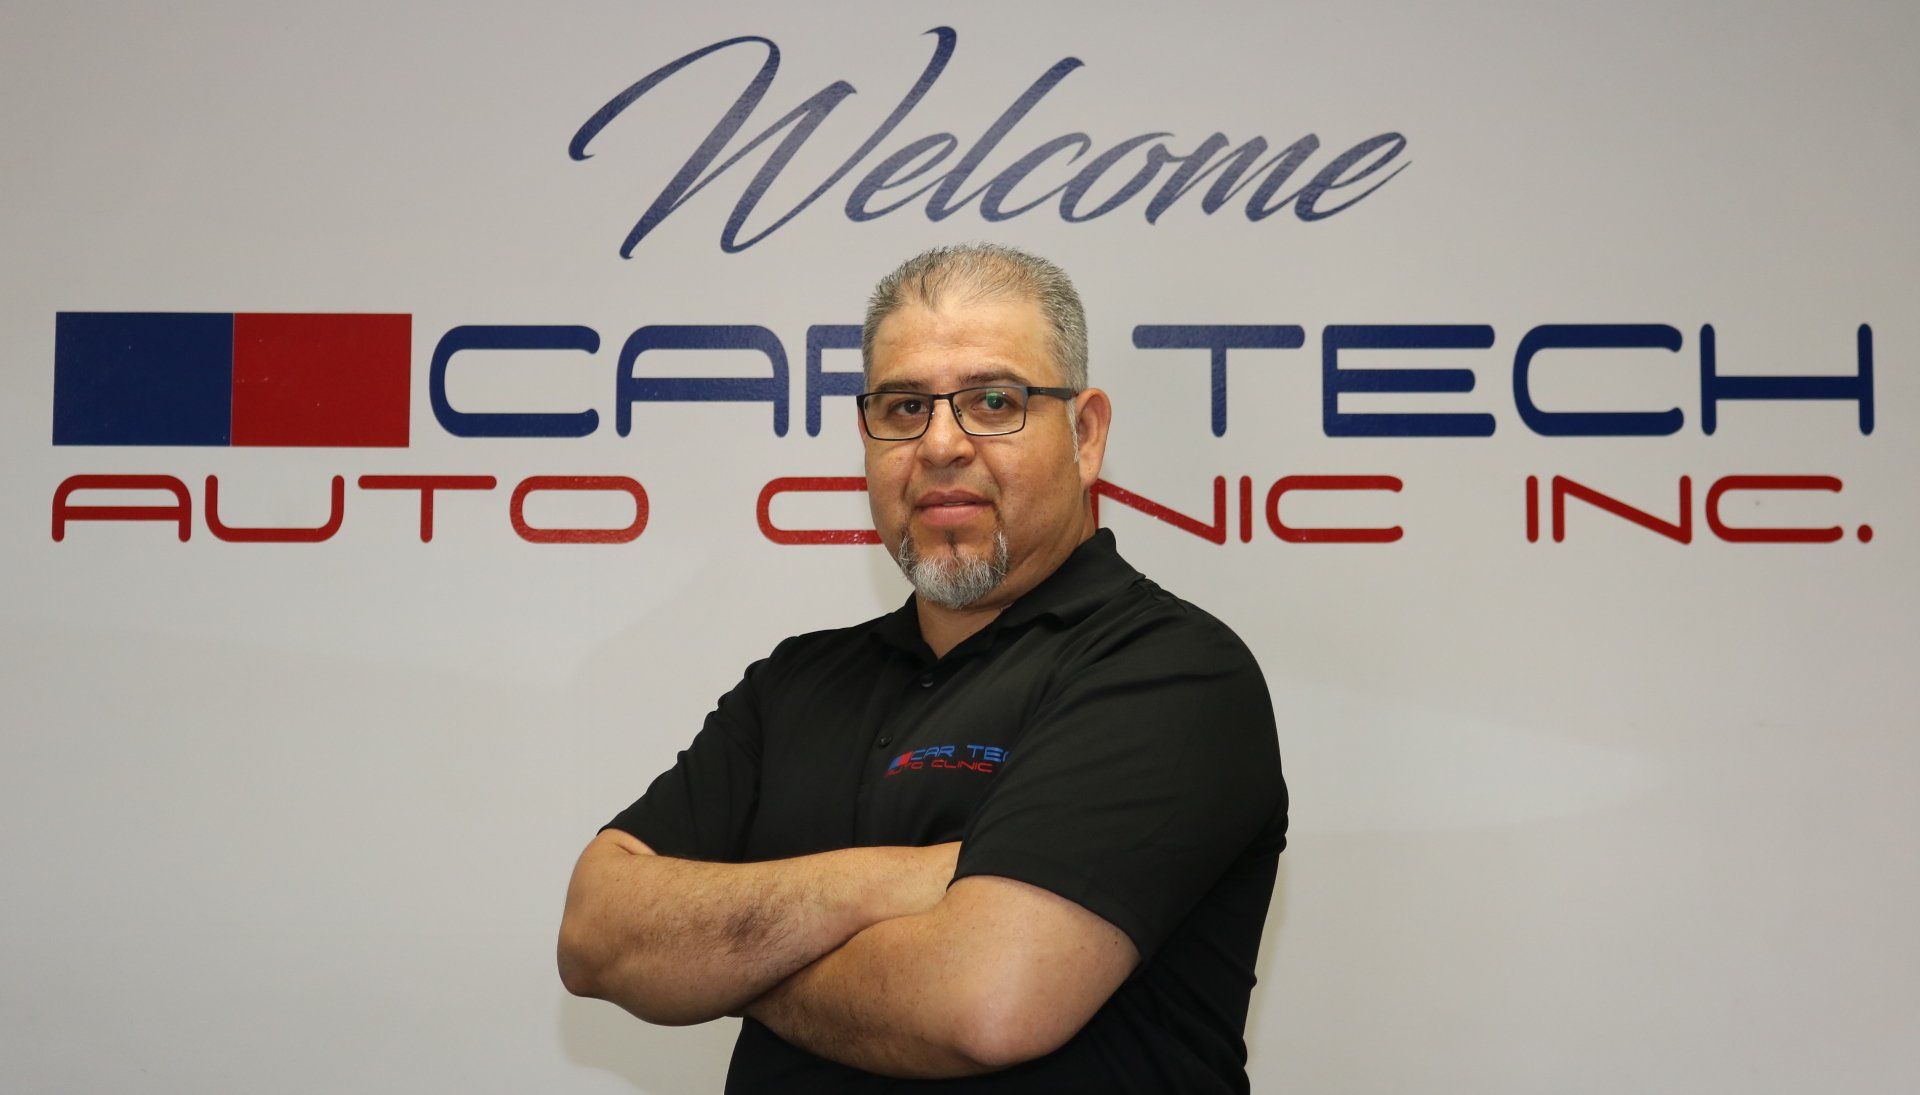 A man is standing in front of a sign that says welcome car tech auto clinic inc.